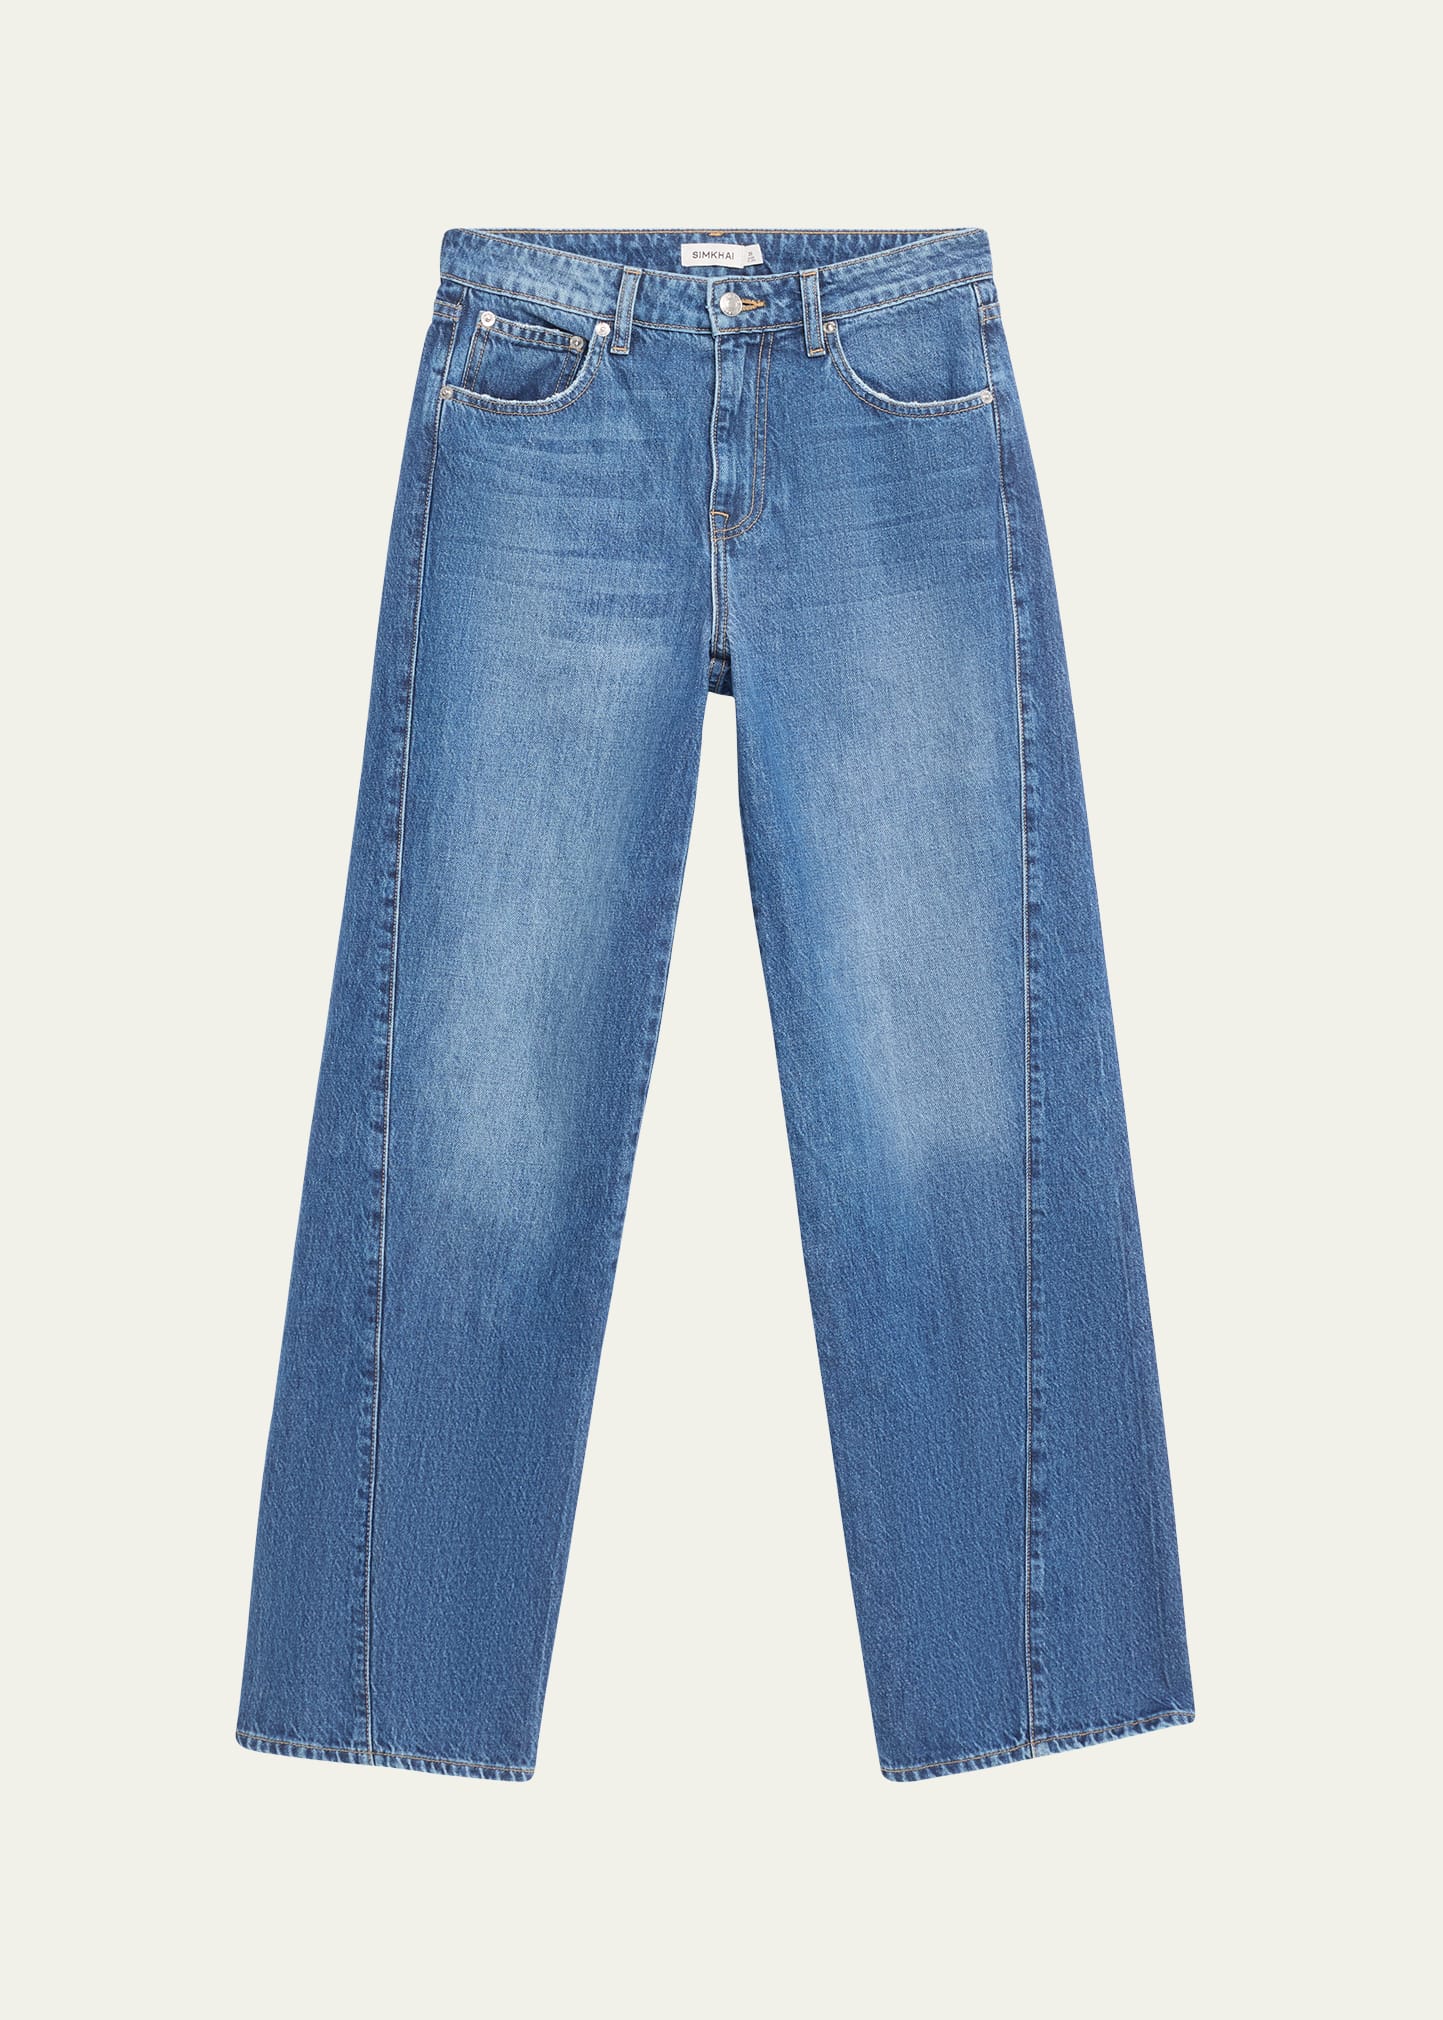 Simkhai Sawyer Relaxed Tapered Denim Jeans In Saltan